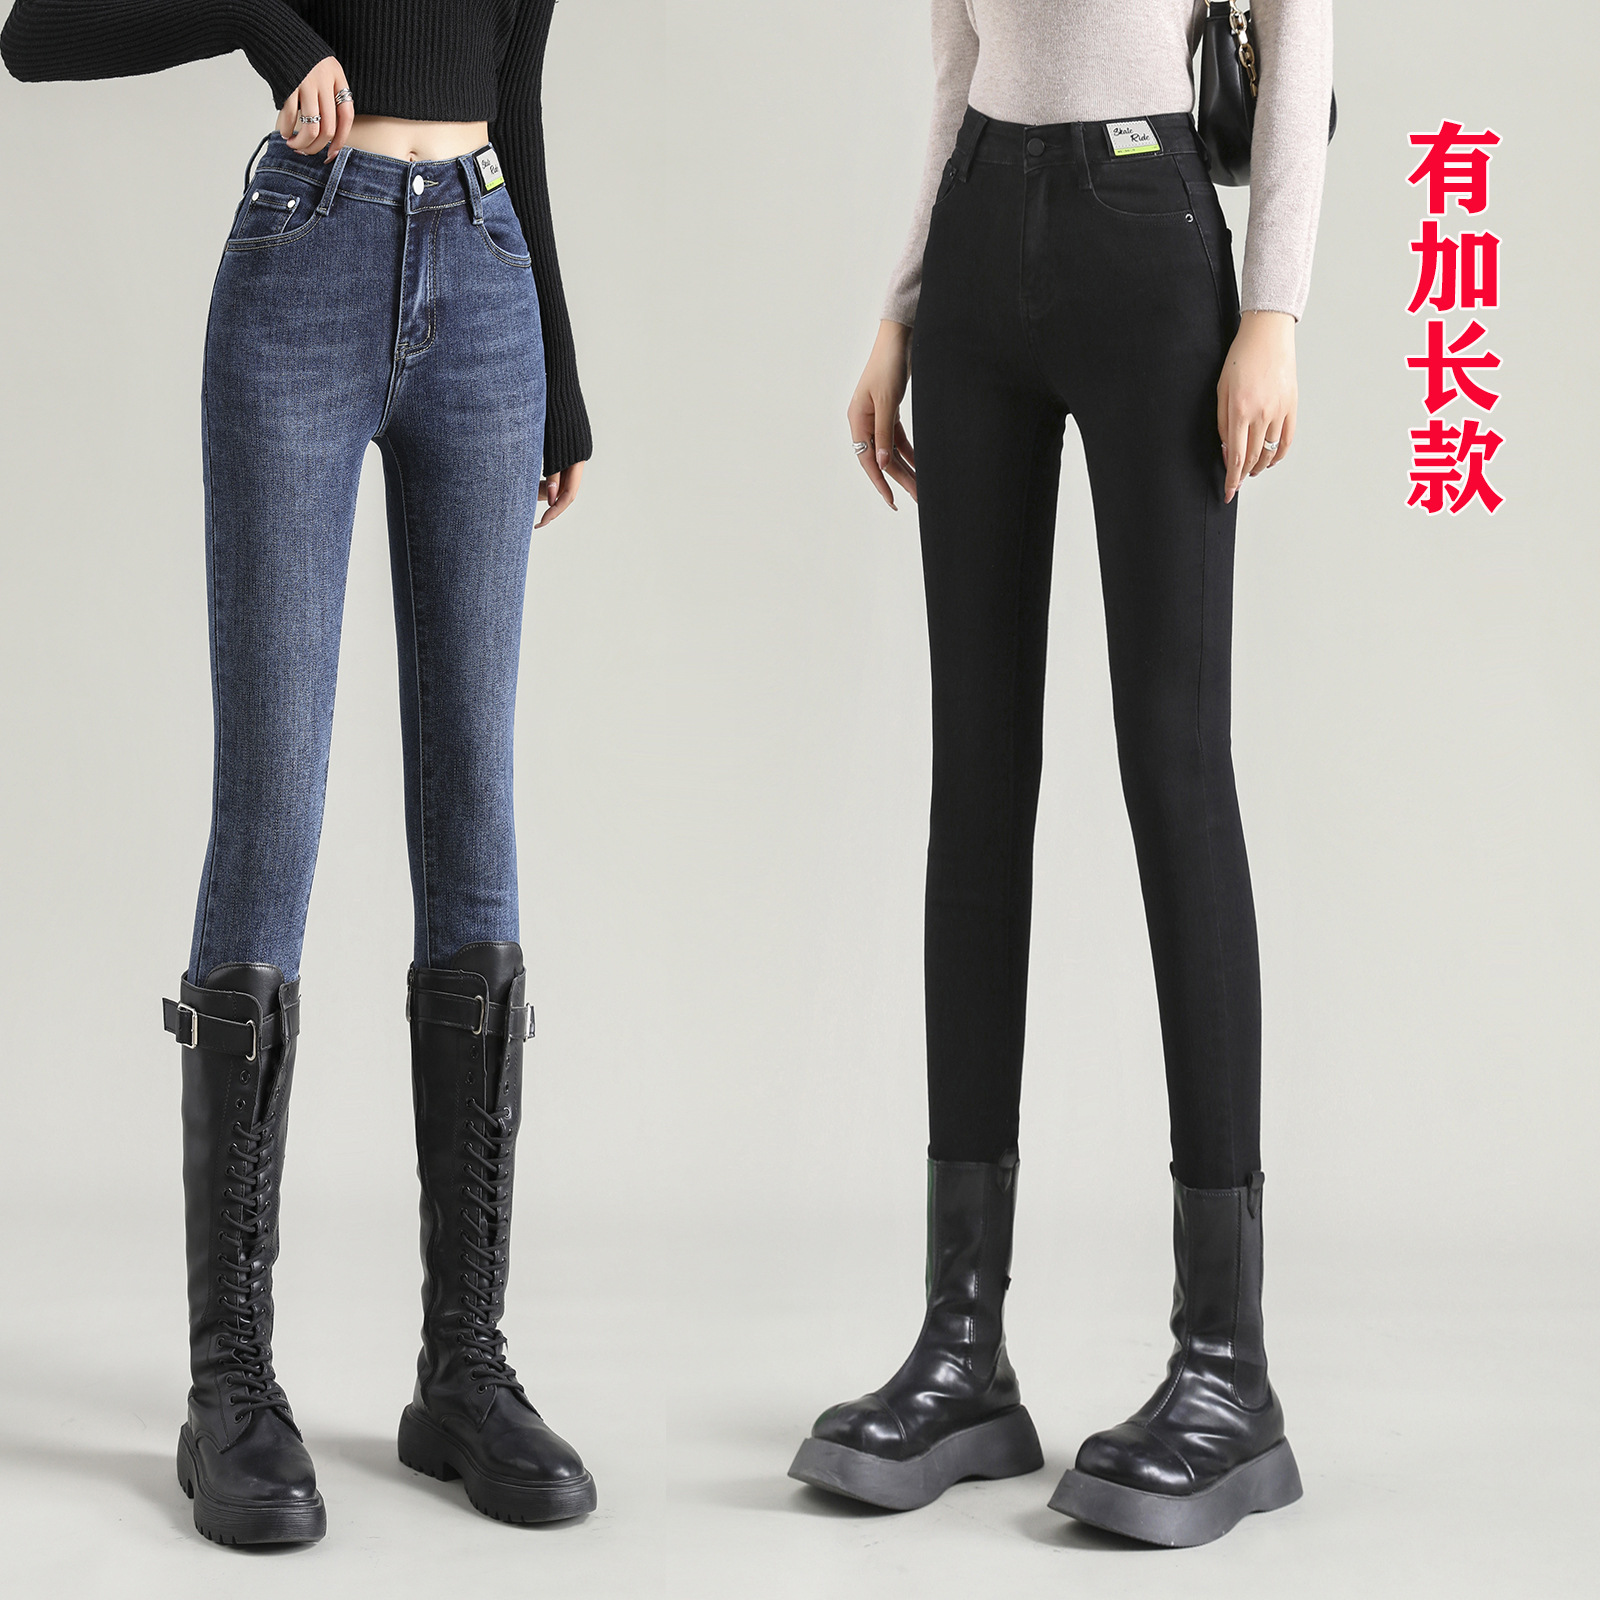 2022 Autumn and winter Pencil pants Strikes Large Self cultivation Elastic force Pencil Pants Fat sister Show thin Tall lengthen Jeans